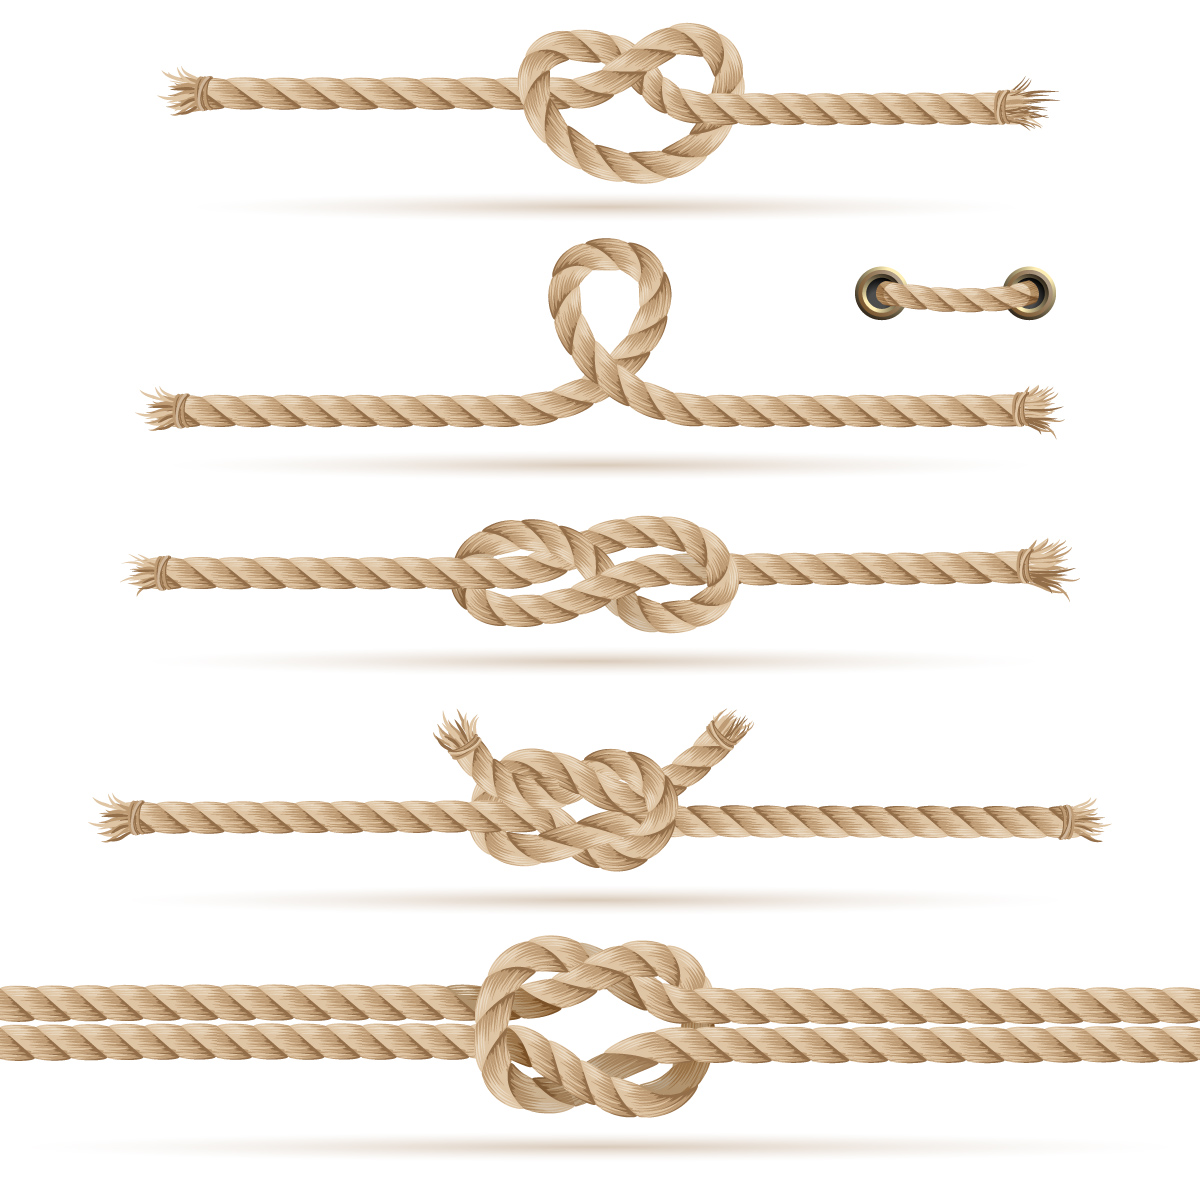 Rope and Cordage Collection